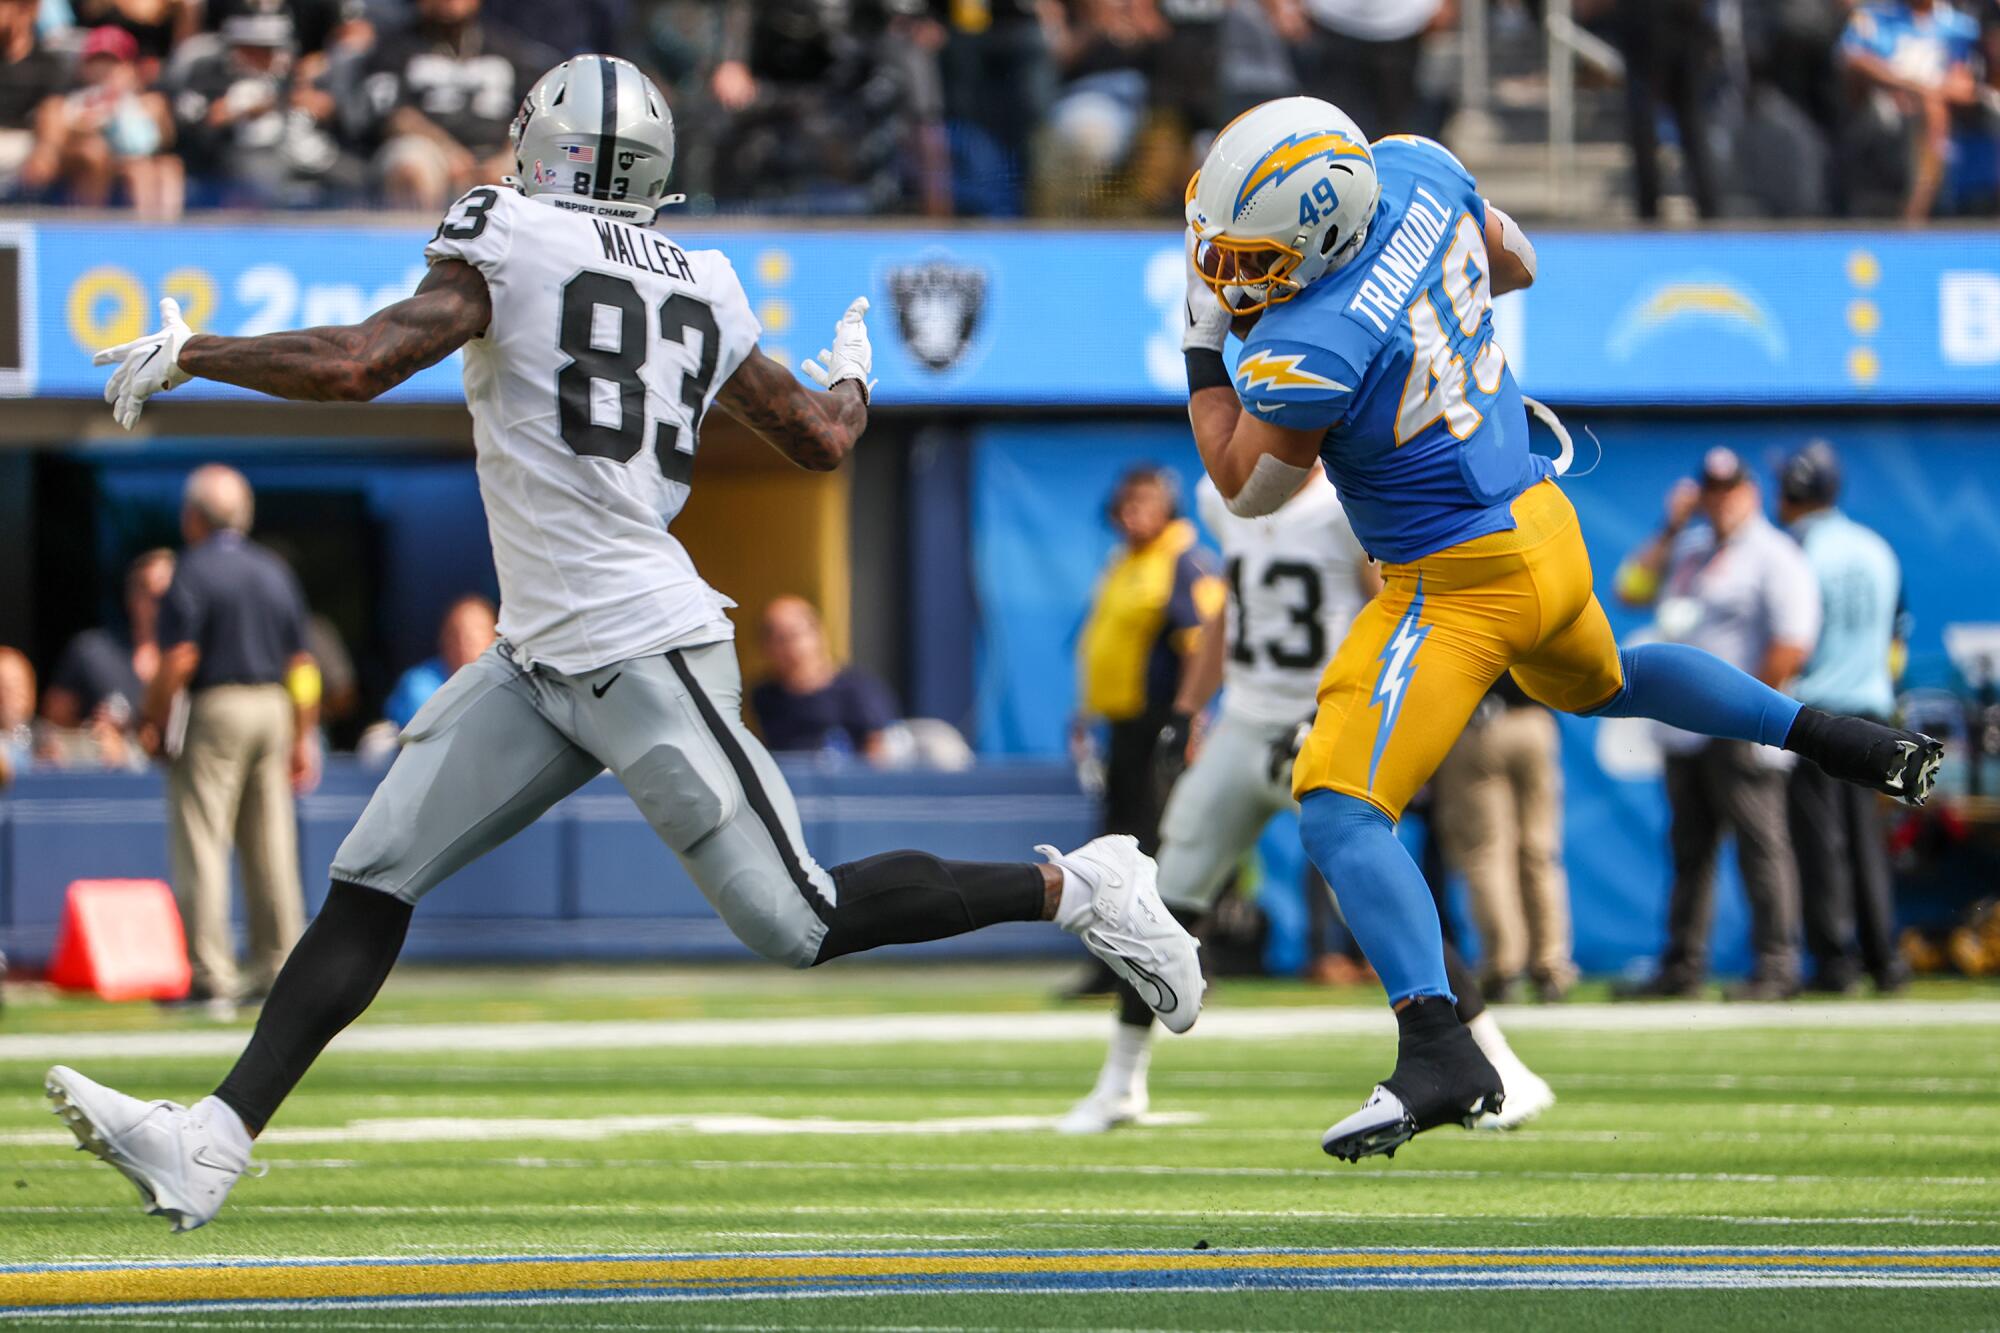 Chargers linebacker Drew Tranquill, right, intercepts a pass in front of Las Vegas Raiders tight end Darren Waller.